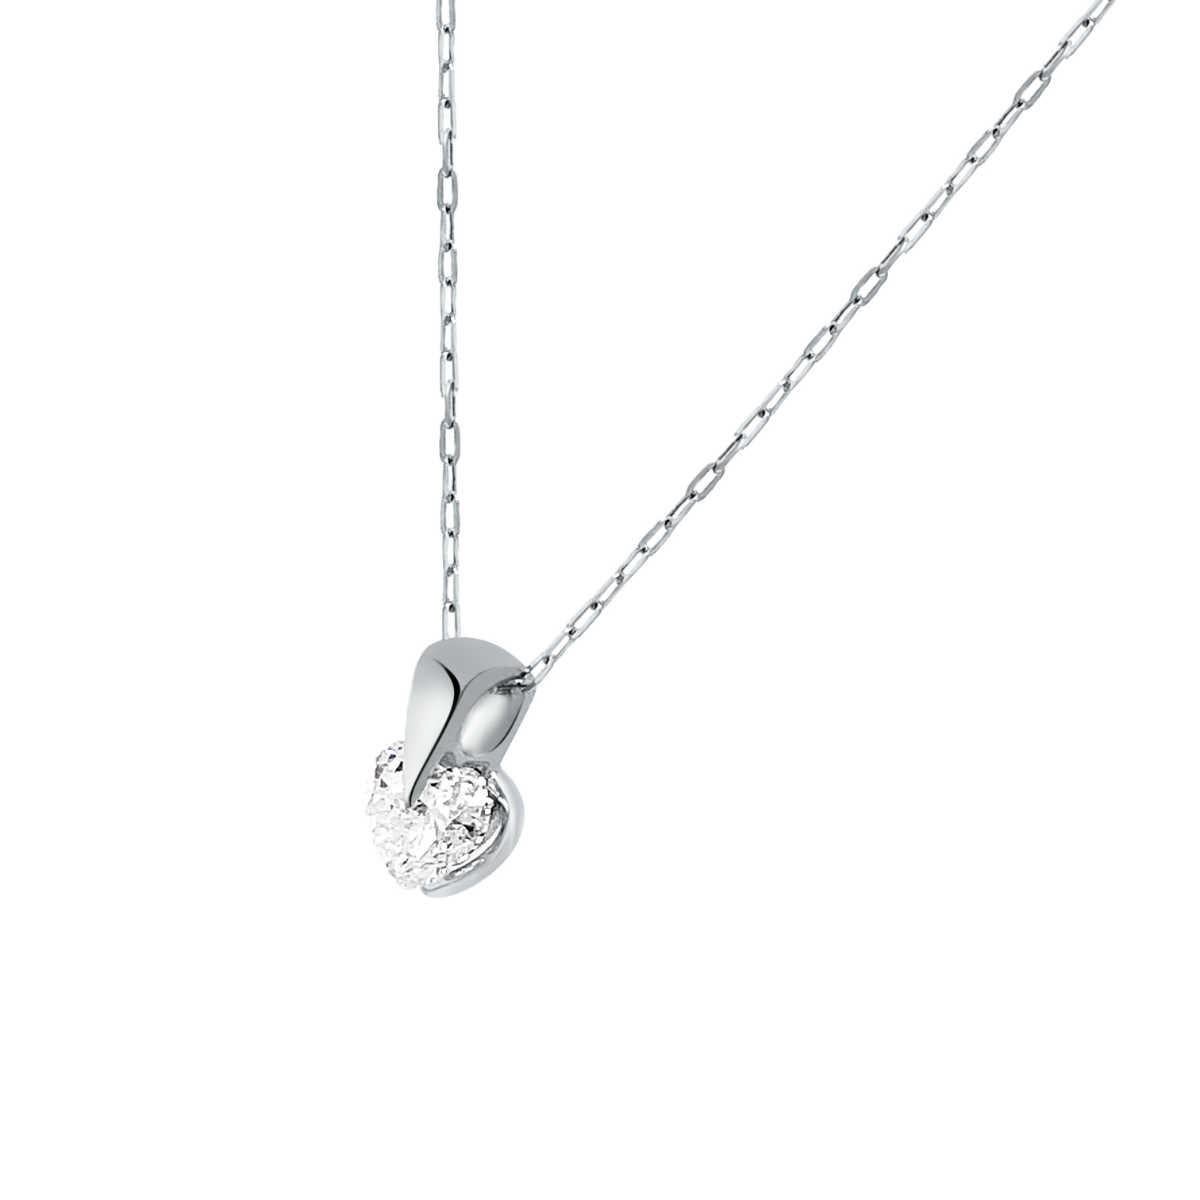 This 18K White Gold floating style handcrafted Women's solitaire pendant showcases a Heart-shaped diamond on a delicate 18